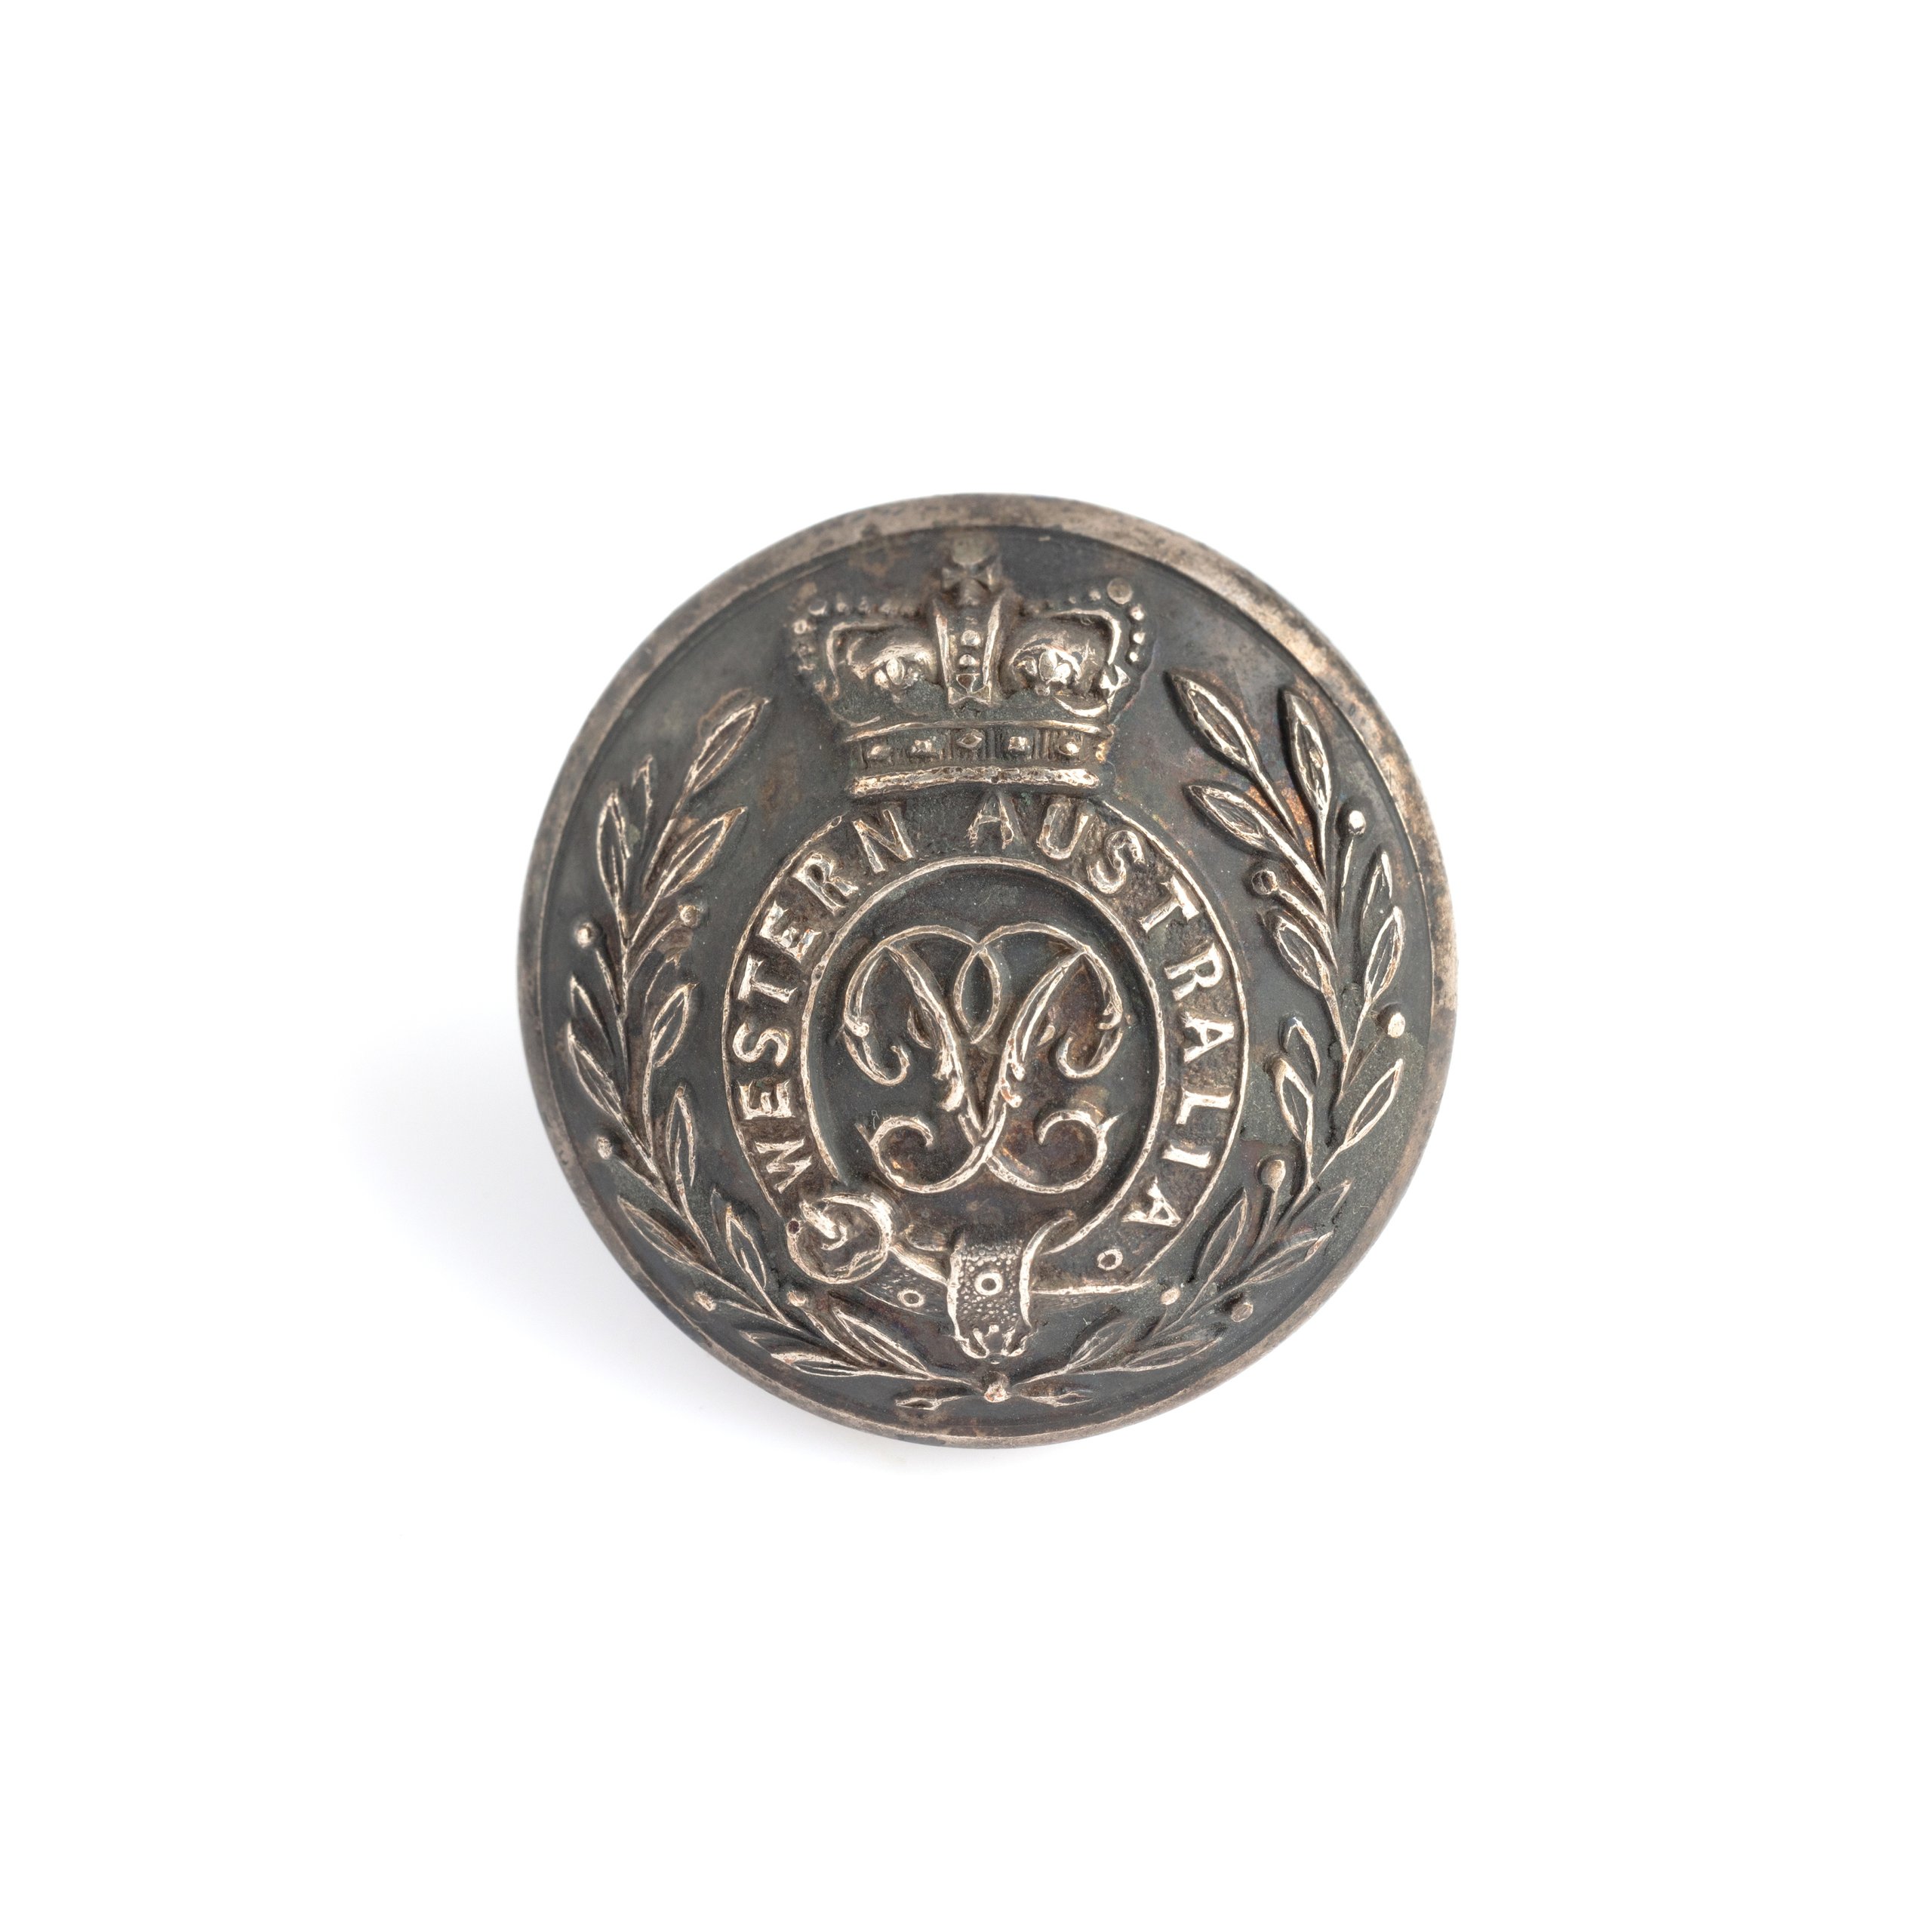 Uniform button issued by Western Australian Defence Force